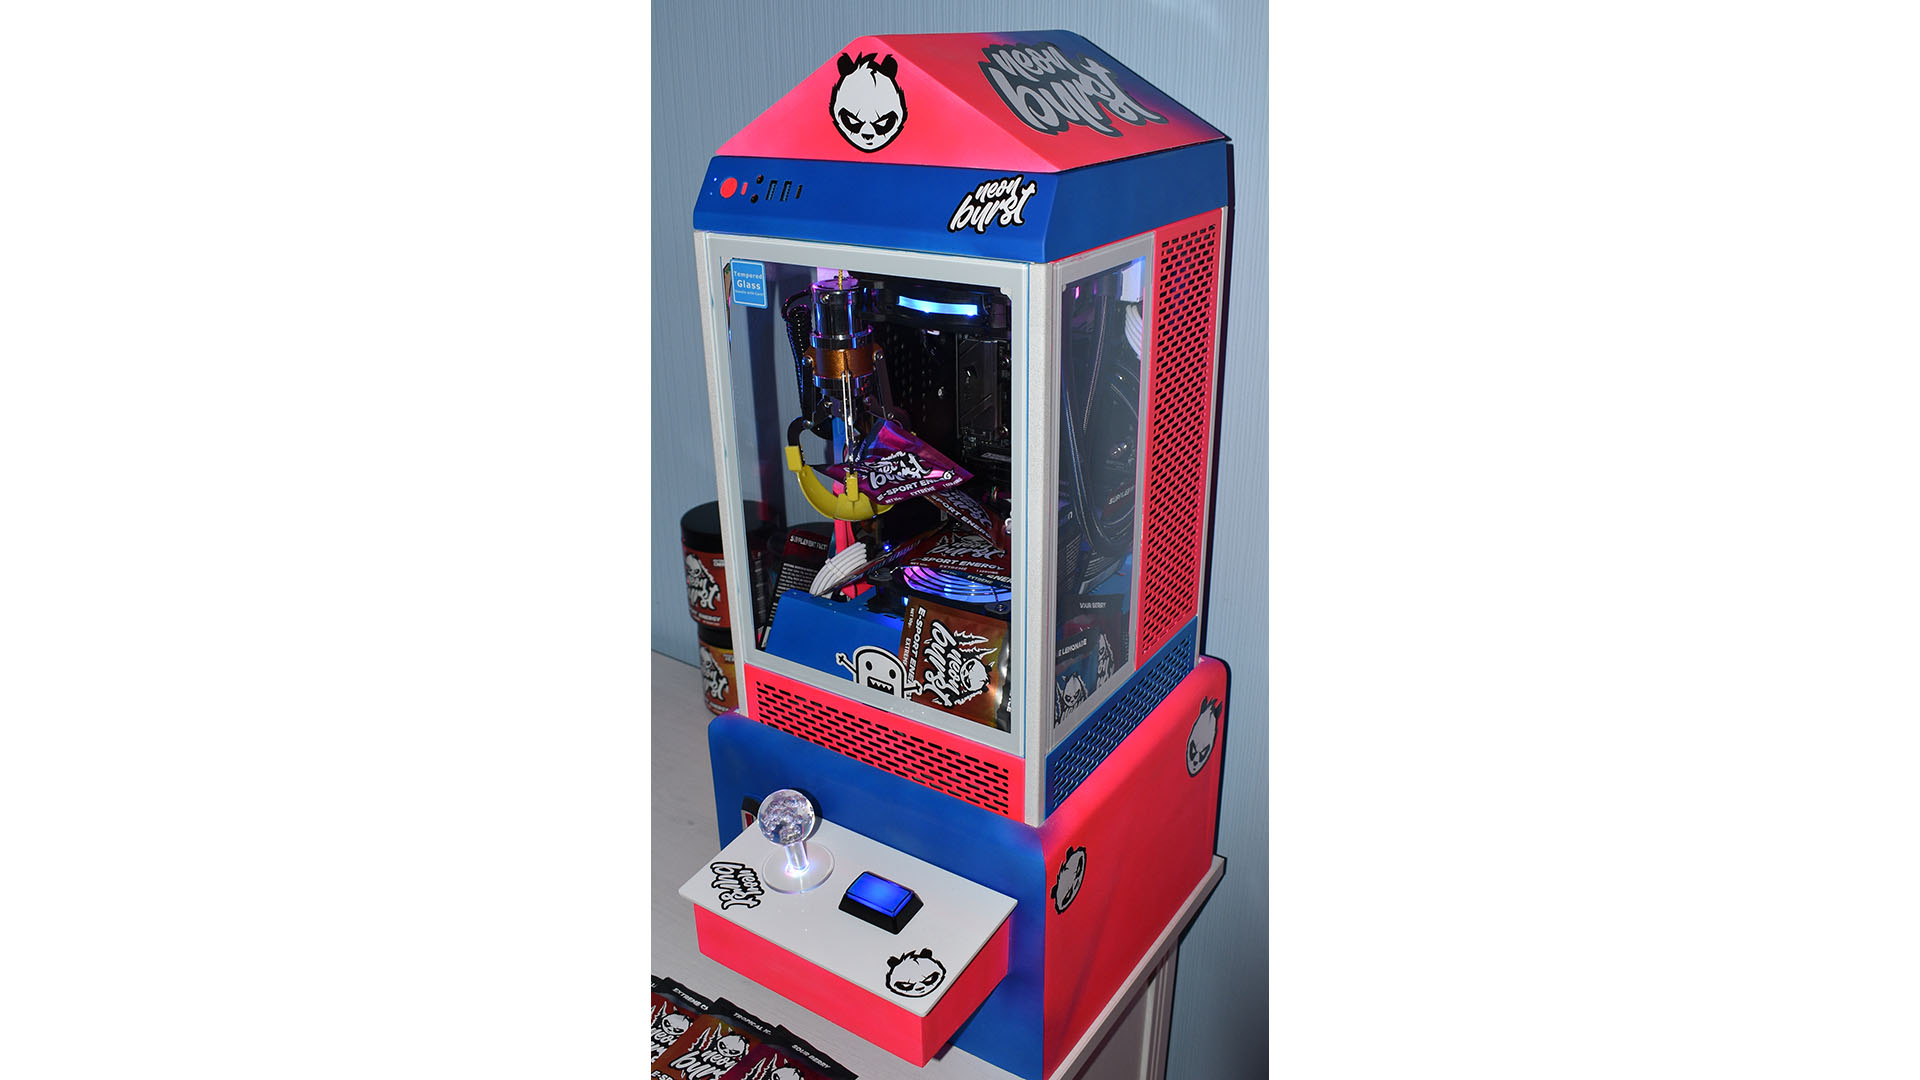 The claw arcade gaming PC in blue and red